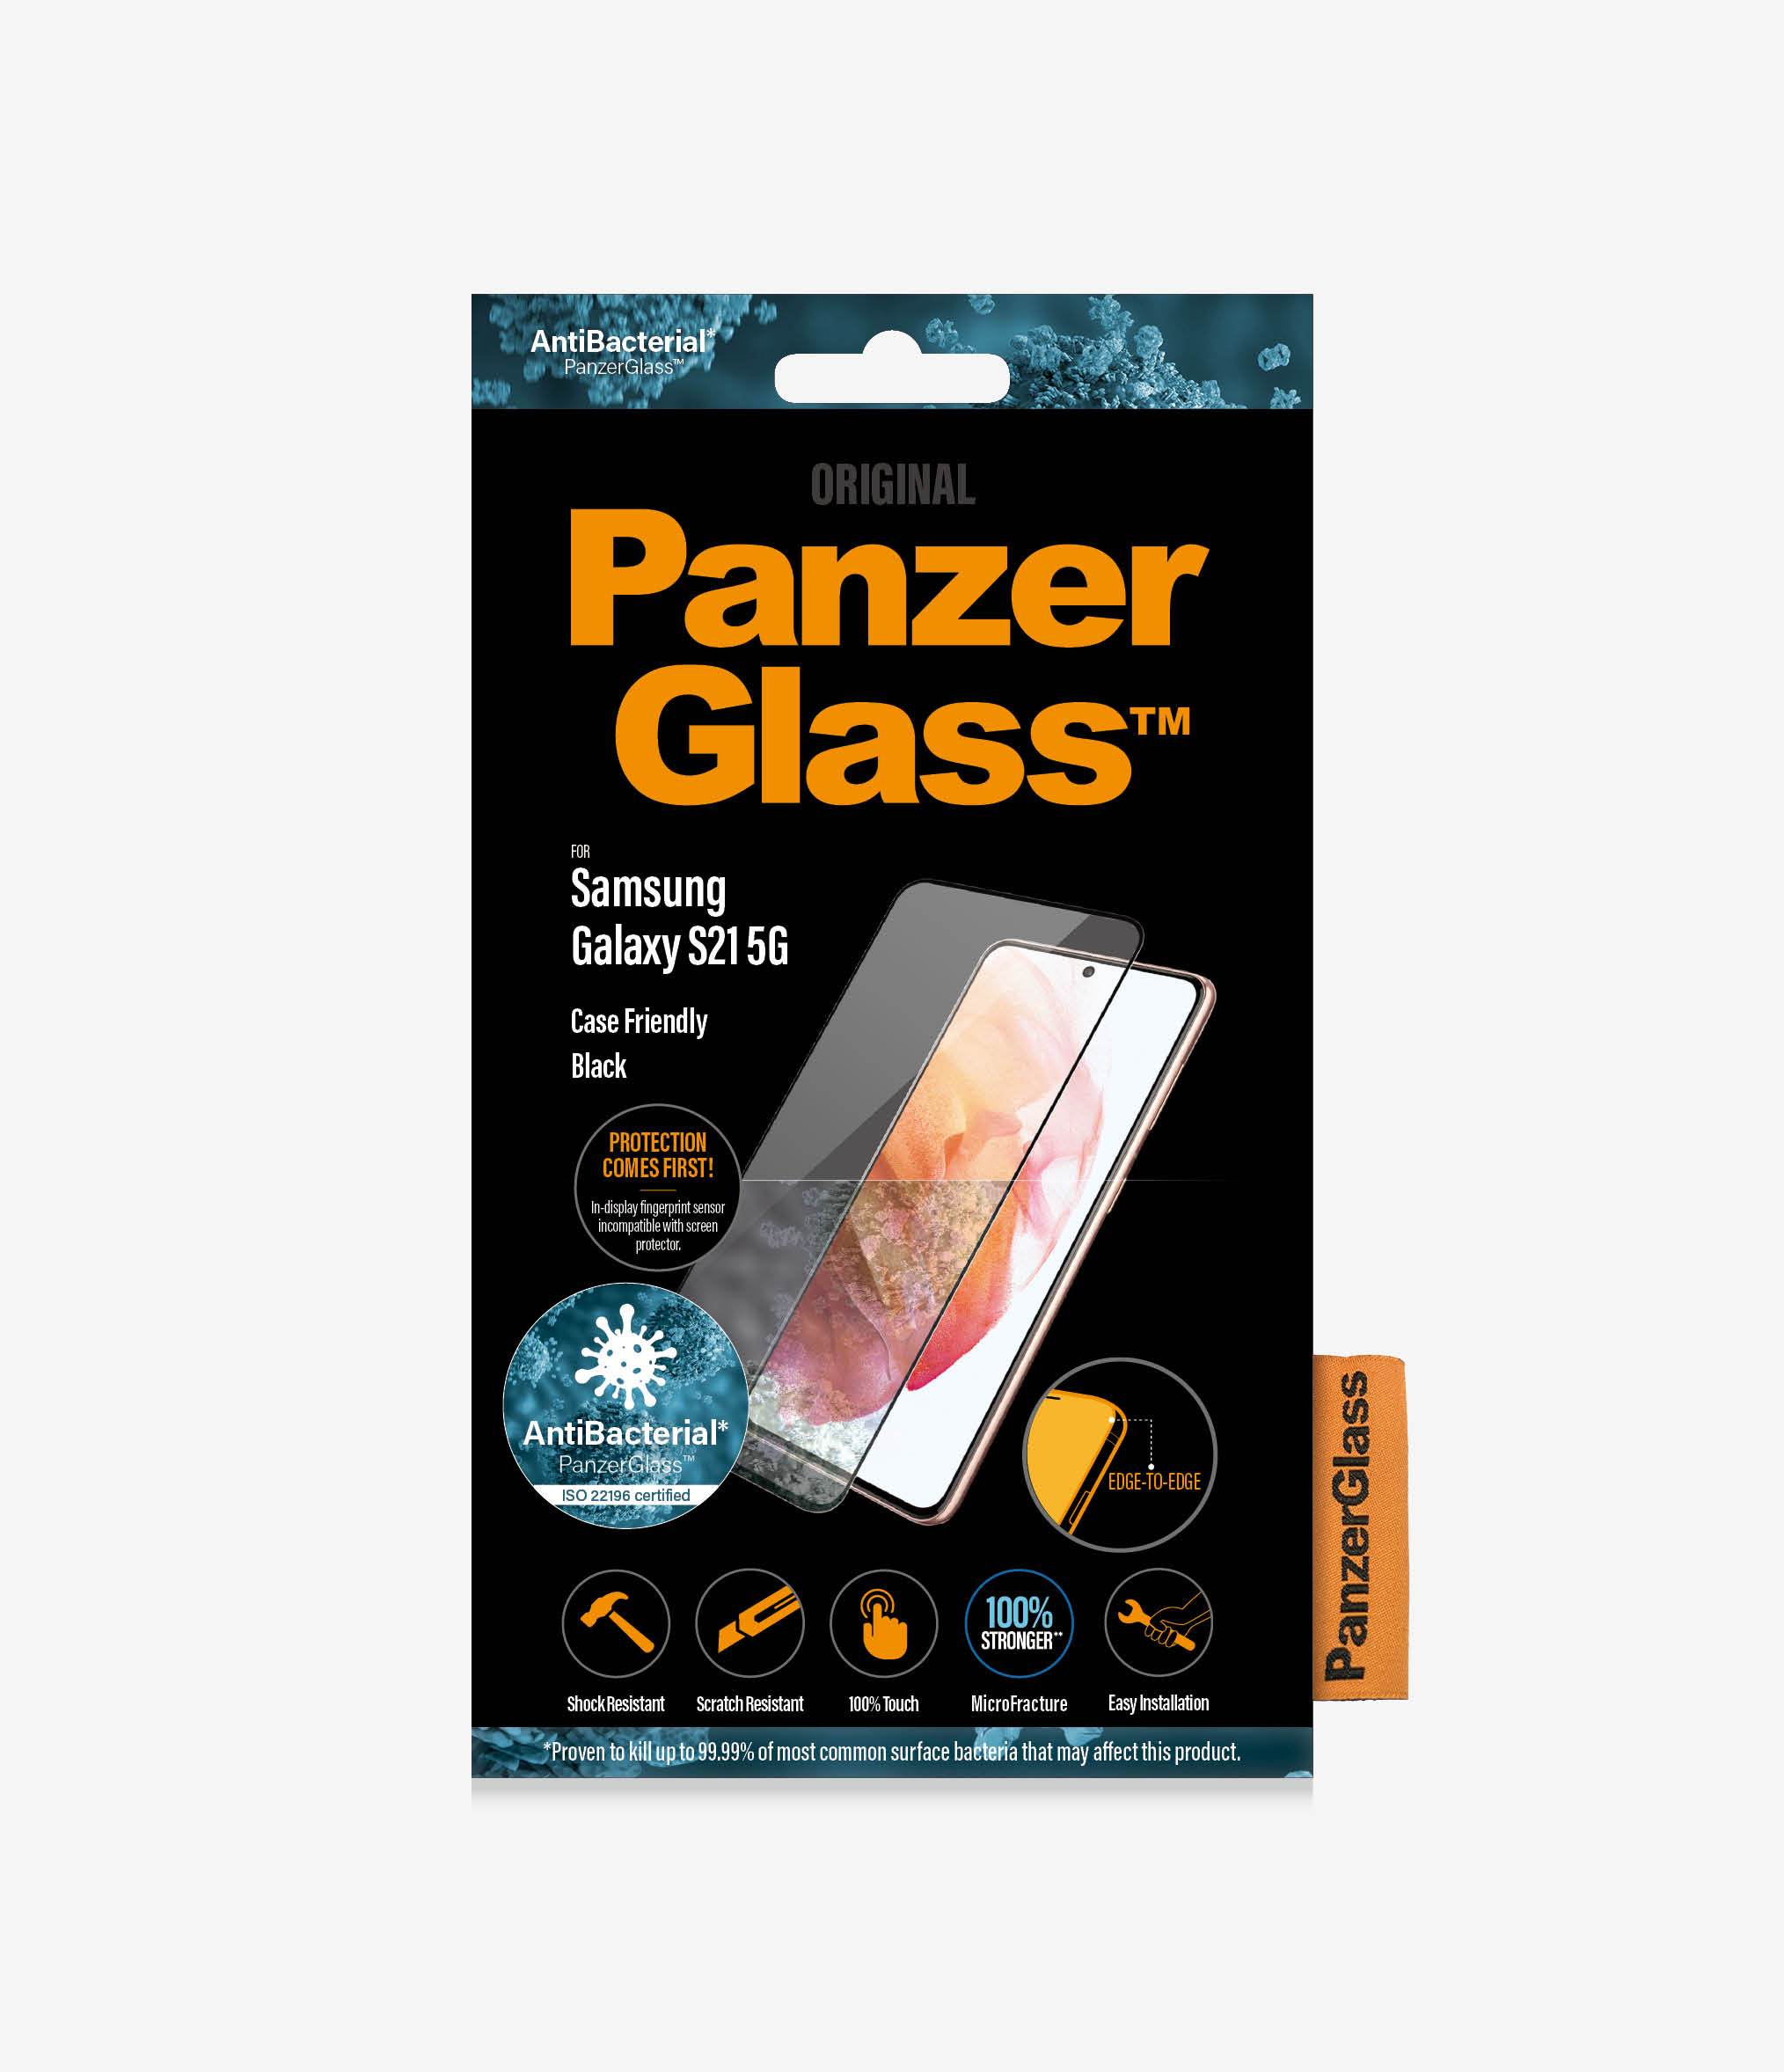 PanzerGlass™ Samsung Galaxy S21 - Clear Glass (7263) - Screen Protector - Full frame coverage, Rounded edges, Crystal clear, Anti-Bacterial